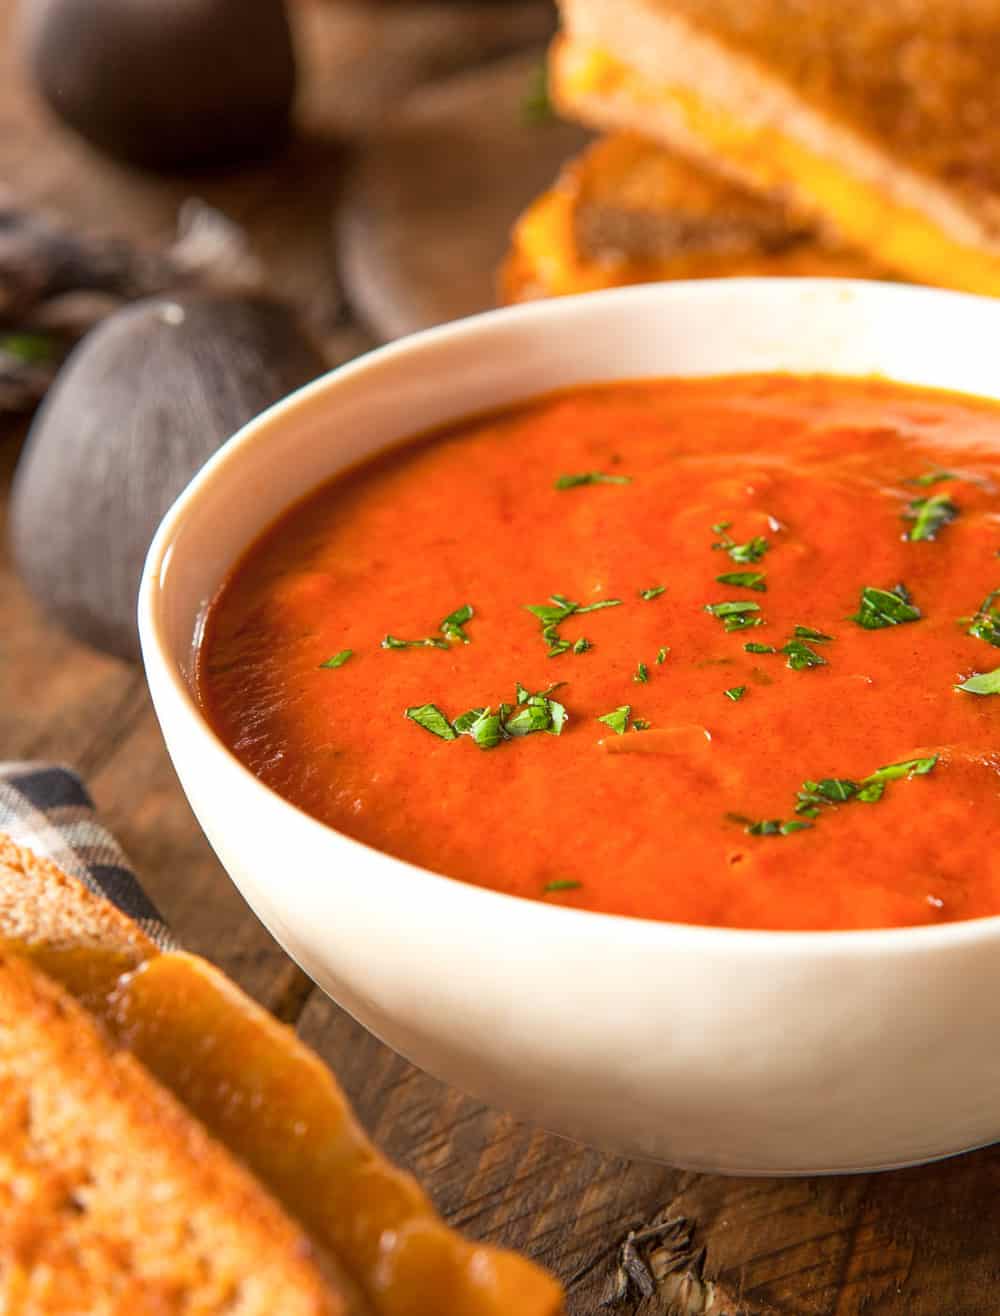 instant pot tomato soup pictured in a white bowl against a wooden background with a grilled cheese sandwich on the side